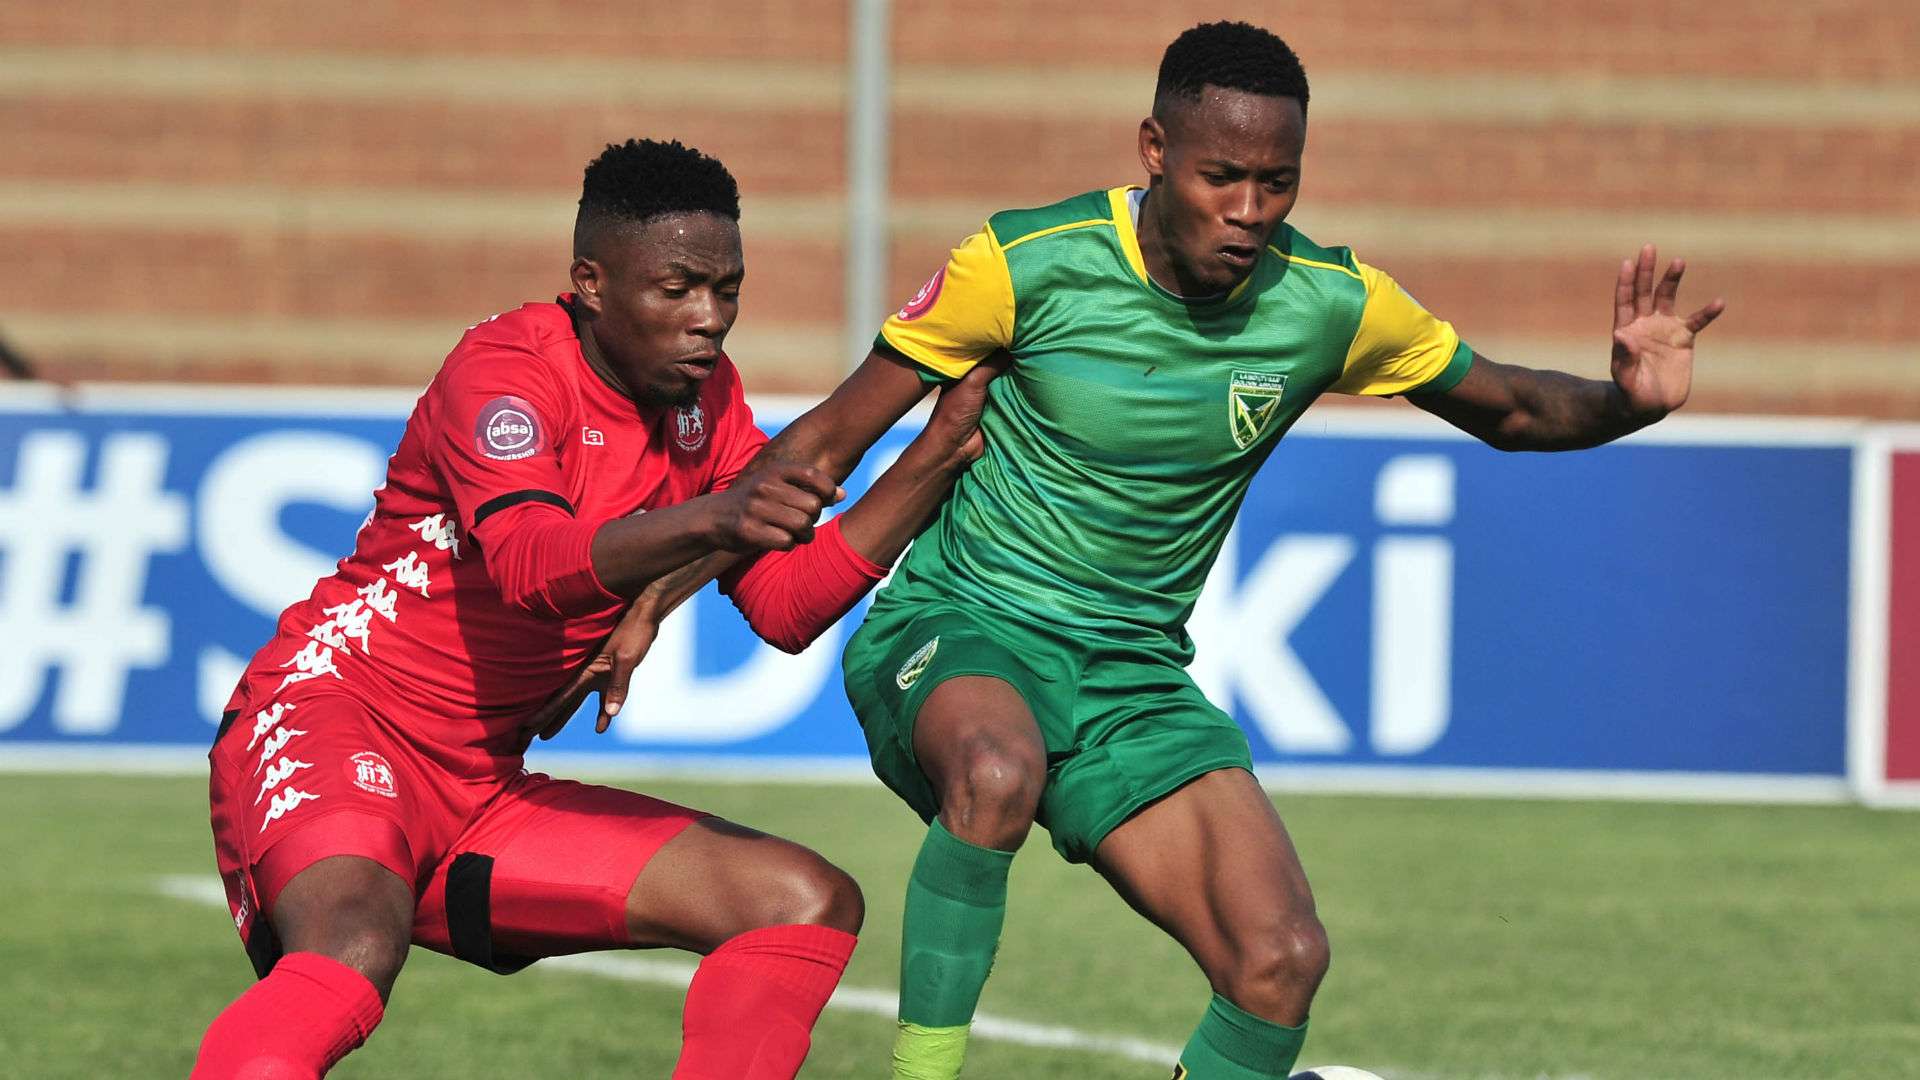 Sello Motsepe Highlands Park challenged by Sibusiso Sibeko of Golden Arrows